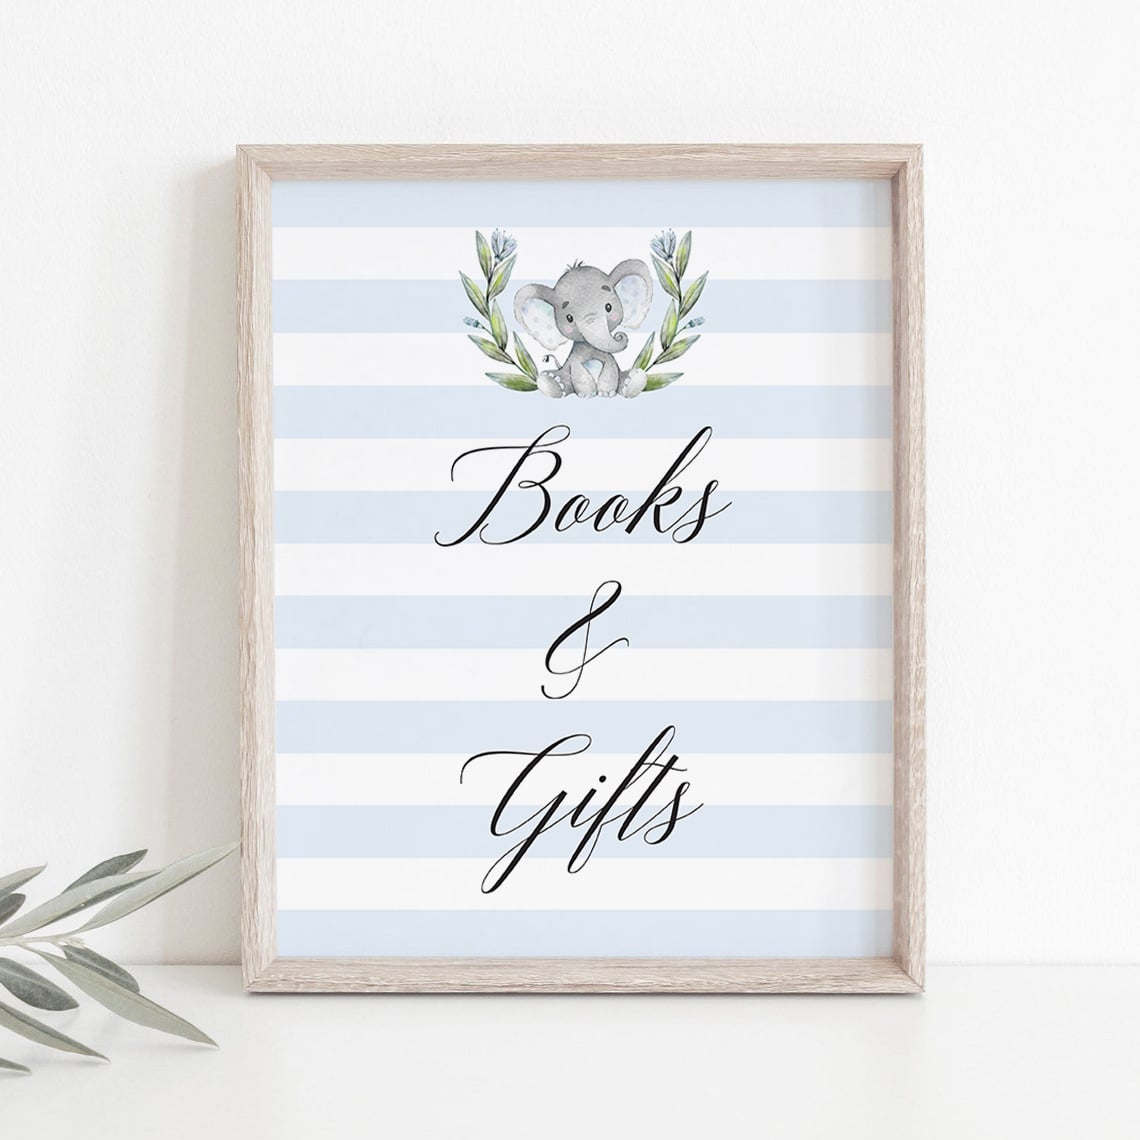 Baby Elephant baby shower books and gifts sign by LittleSizzle